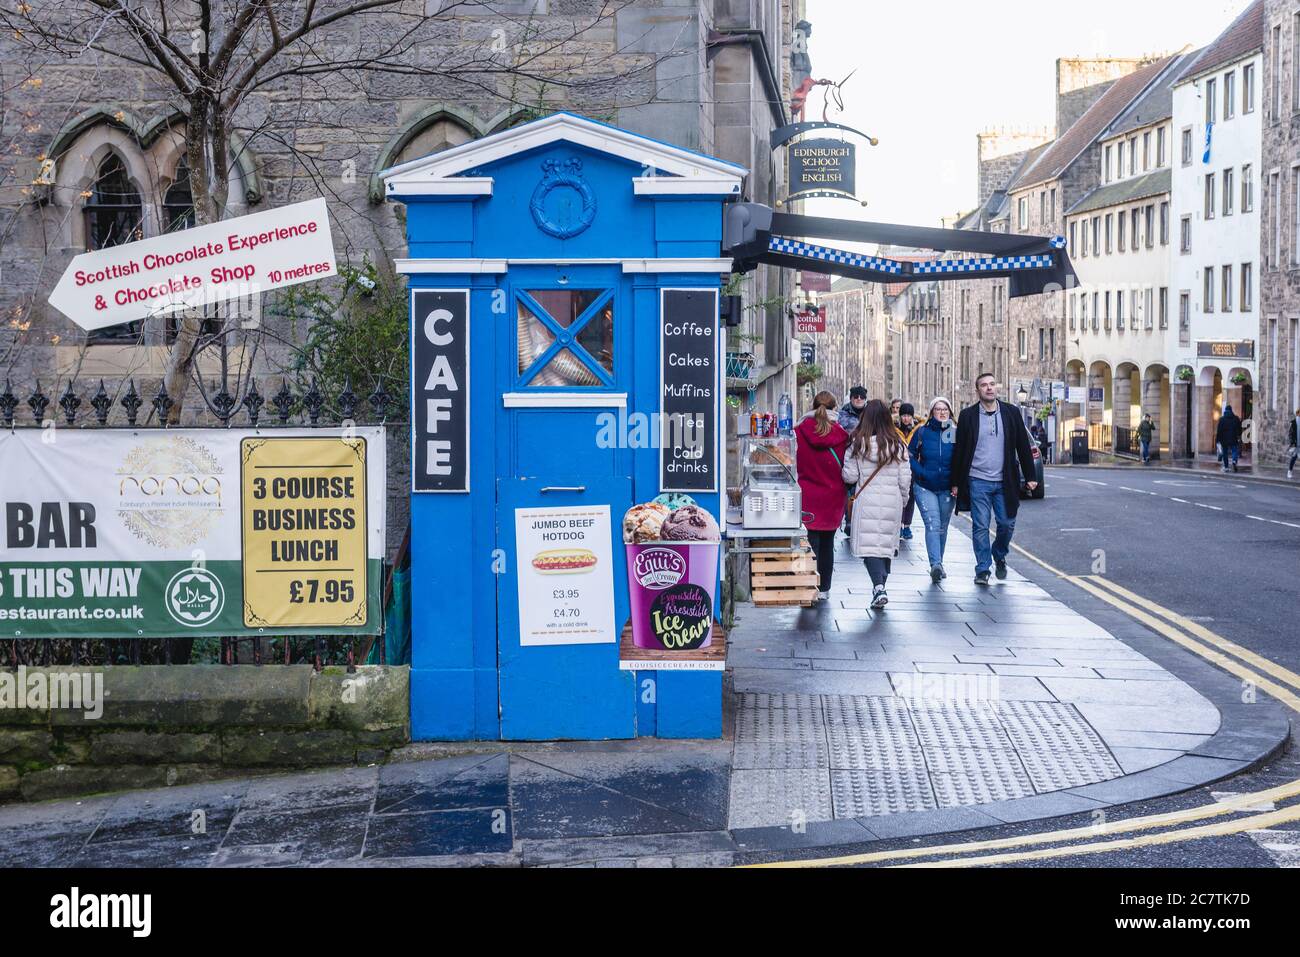 Cafe in old police box on High Street, part of Royal Mile in Edinburgh, capital of Scotland, part of United Kingdom Stock Photo